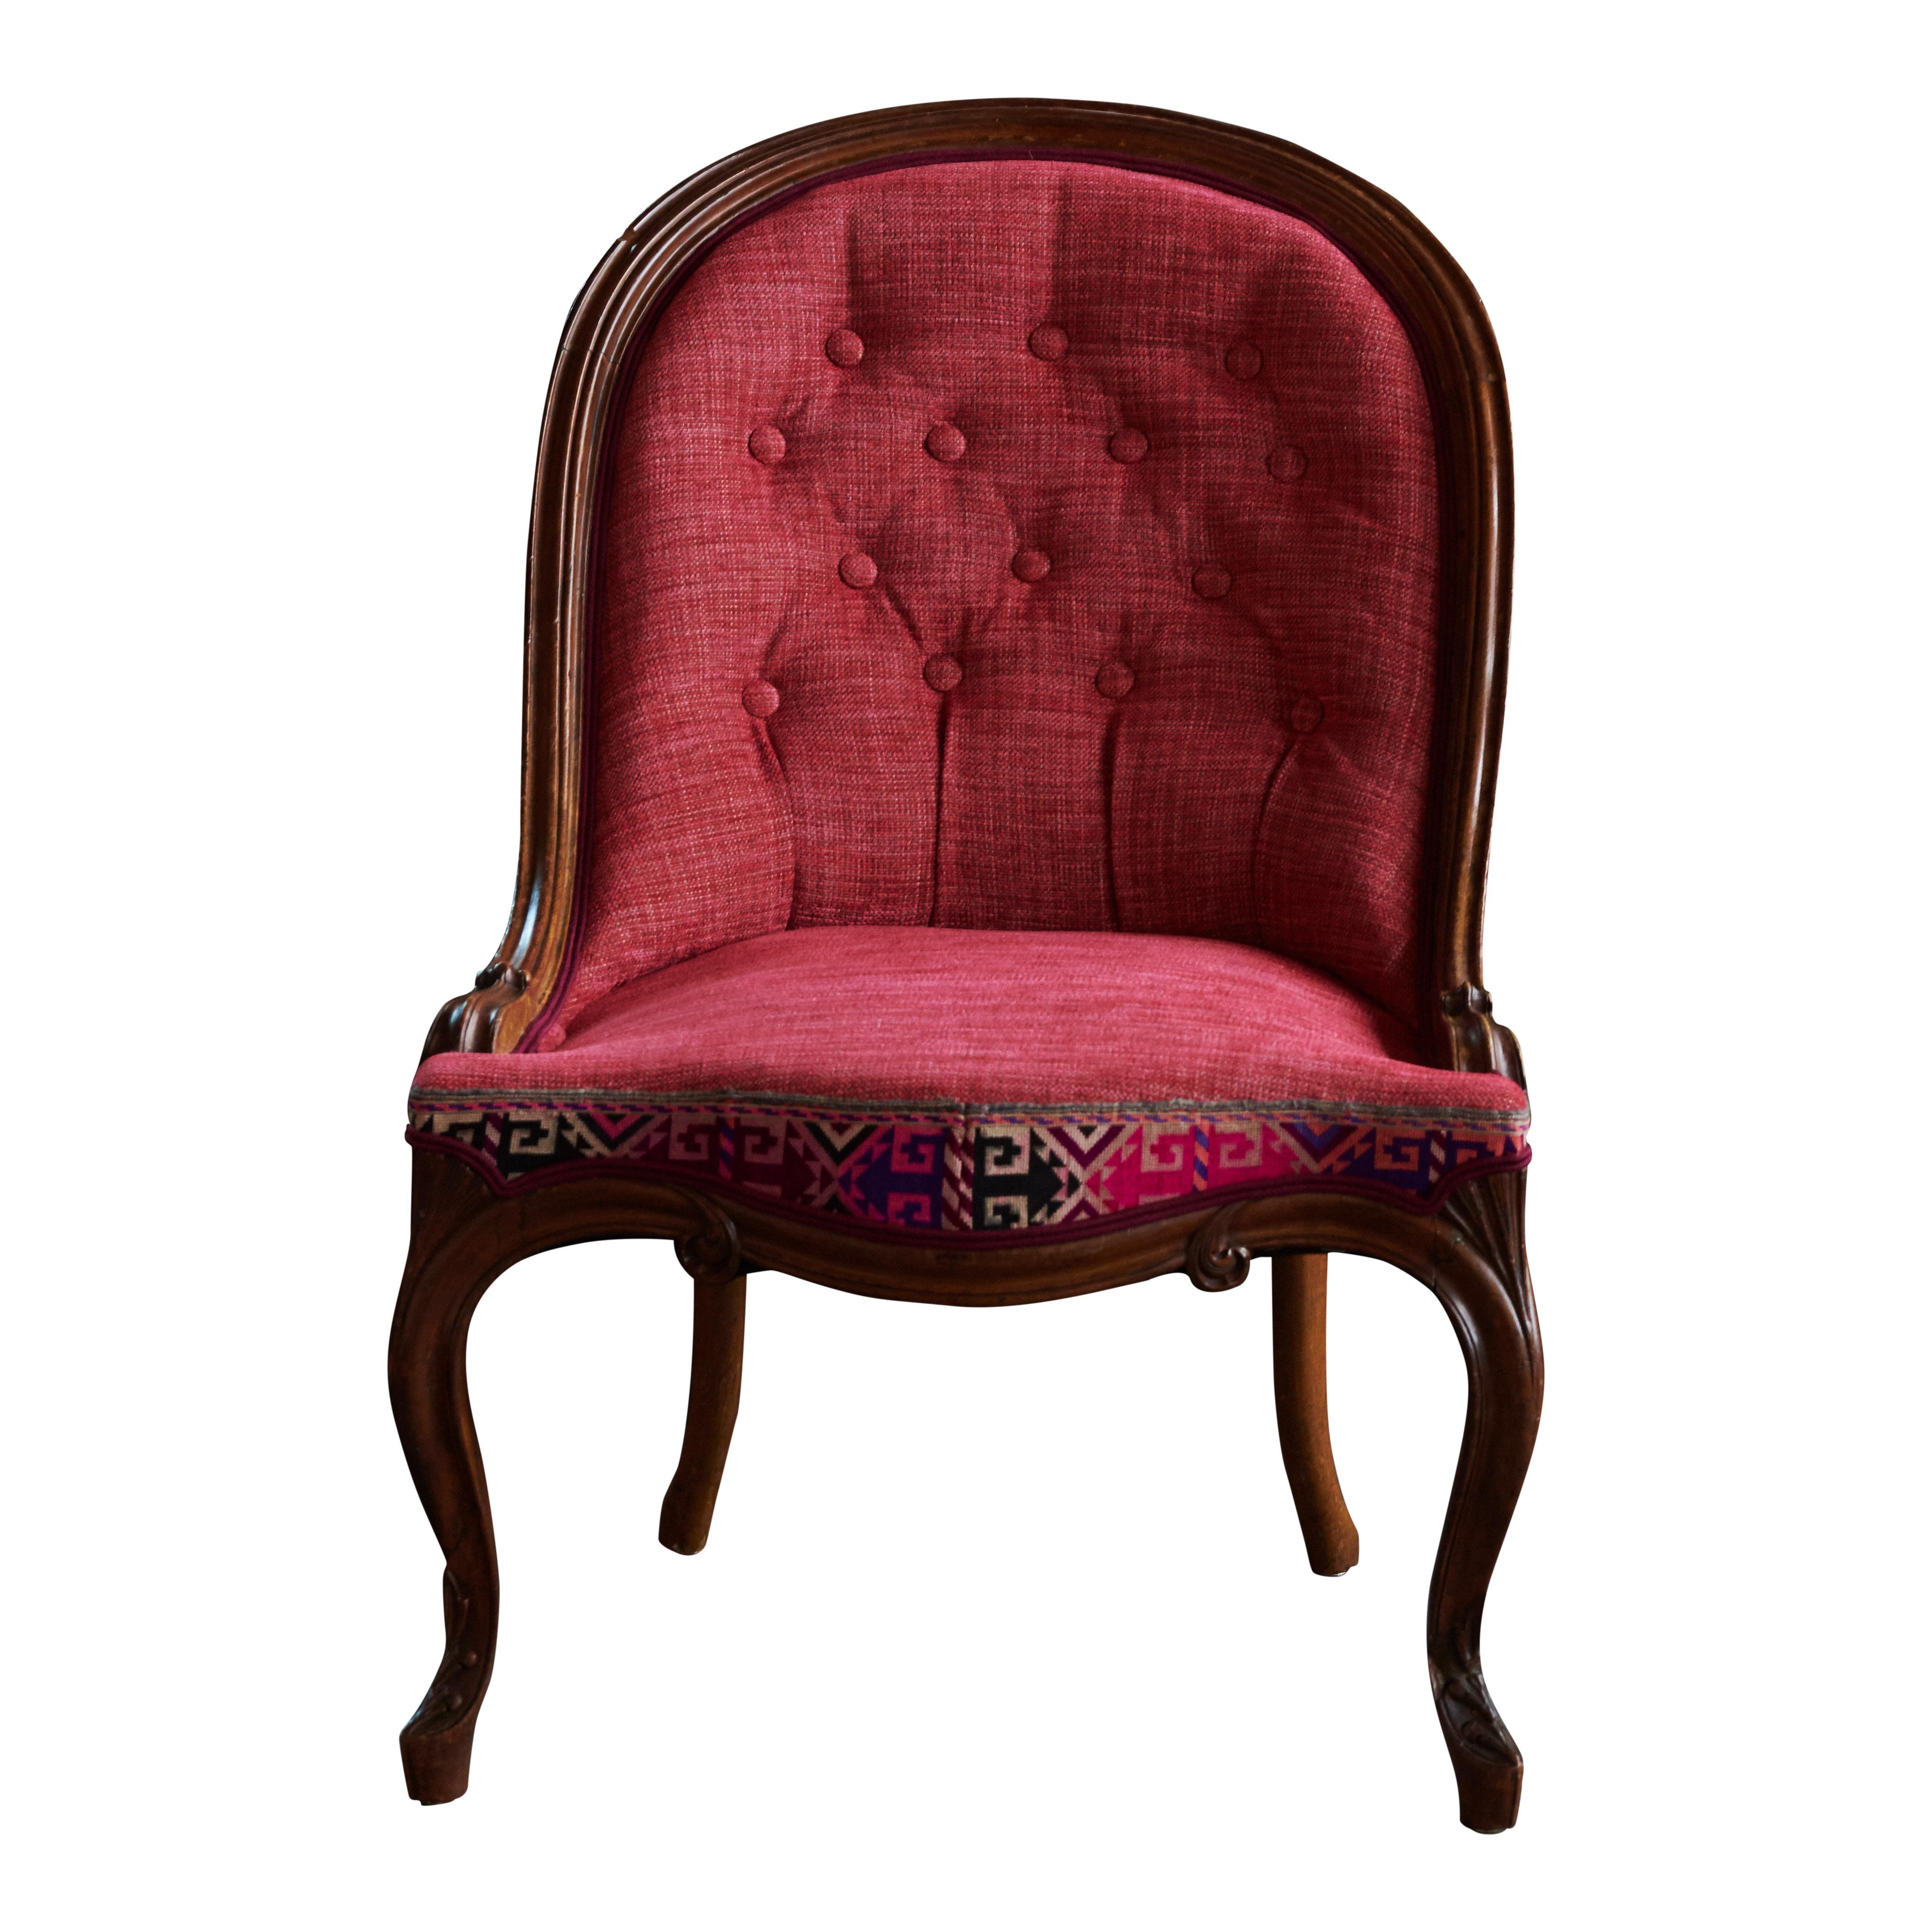 This is an antique nursing chair from the second part of the 19th century (1850-1900), also known as a ‘chauffeuse’. The front has been covered with a new deep pink fabric from Designers Guild. On the back of the chair a fabric Tribe from Pedroso &